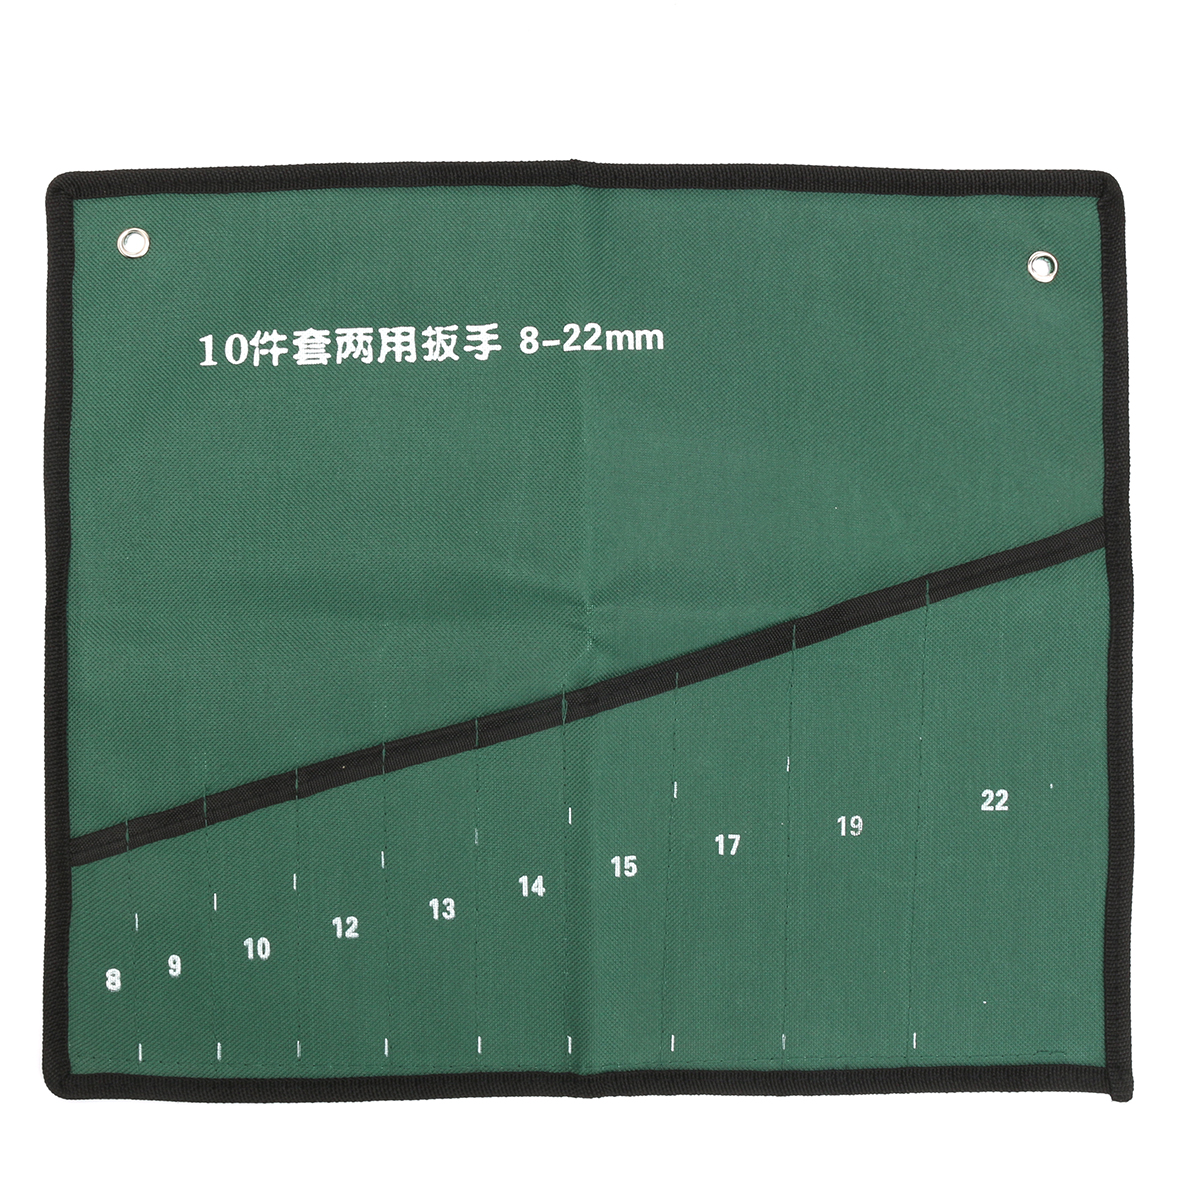 Canvas-Roll-Up-Tool-Storage-Bag-101420-Pocket-Spanner-Wrench-Organizer-Pouch-1288991-3